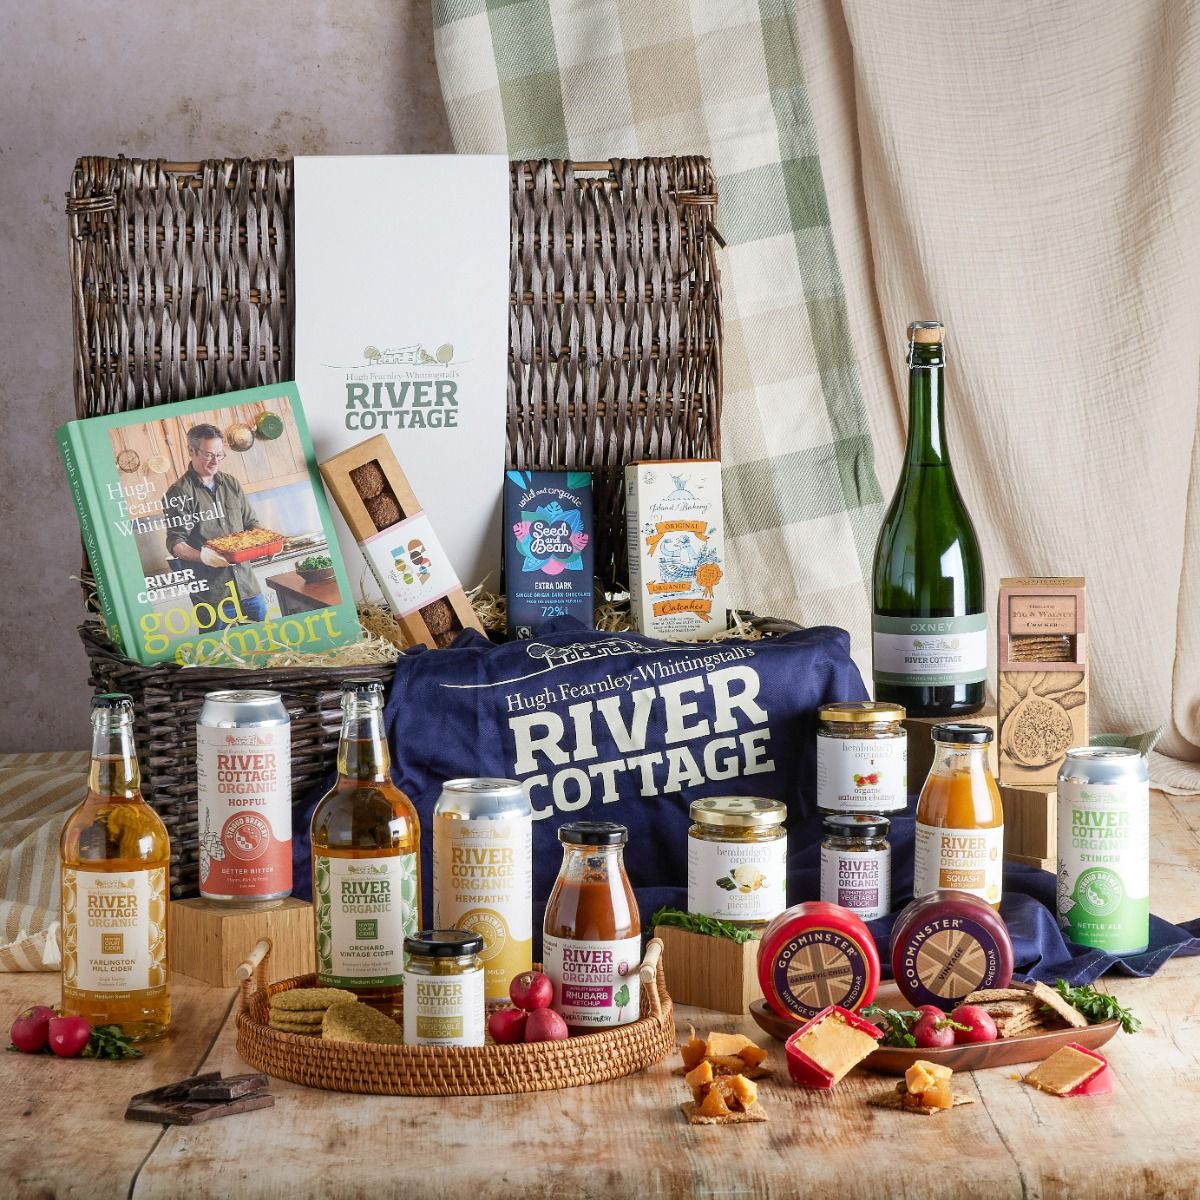 River Cottage Hamper and contents, as a suggestion for a luxury Mother's Day hamper